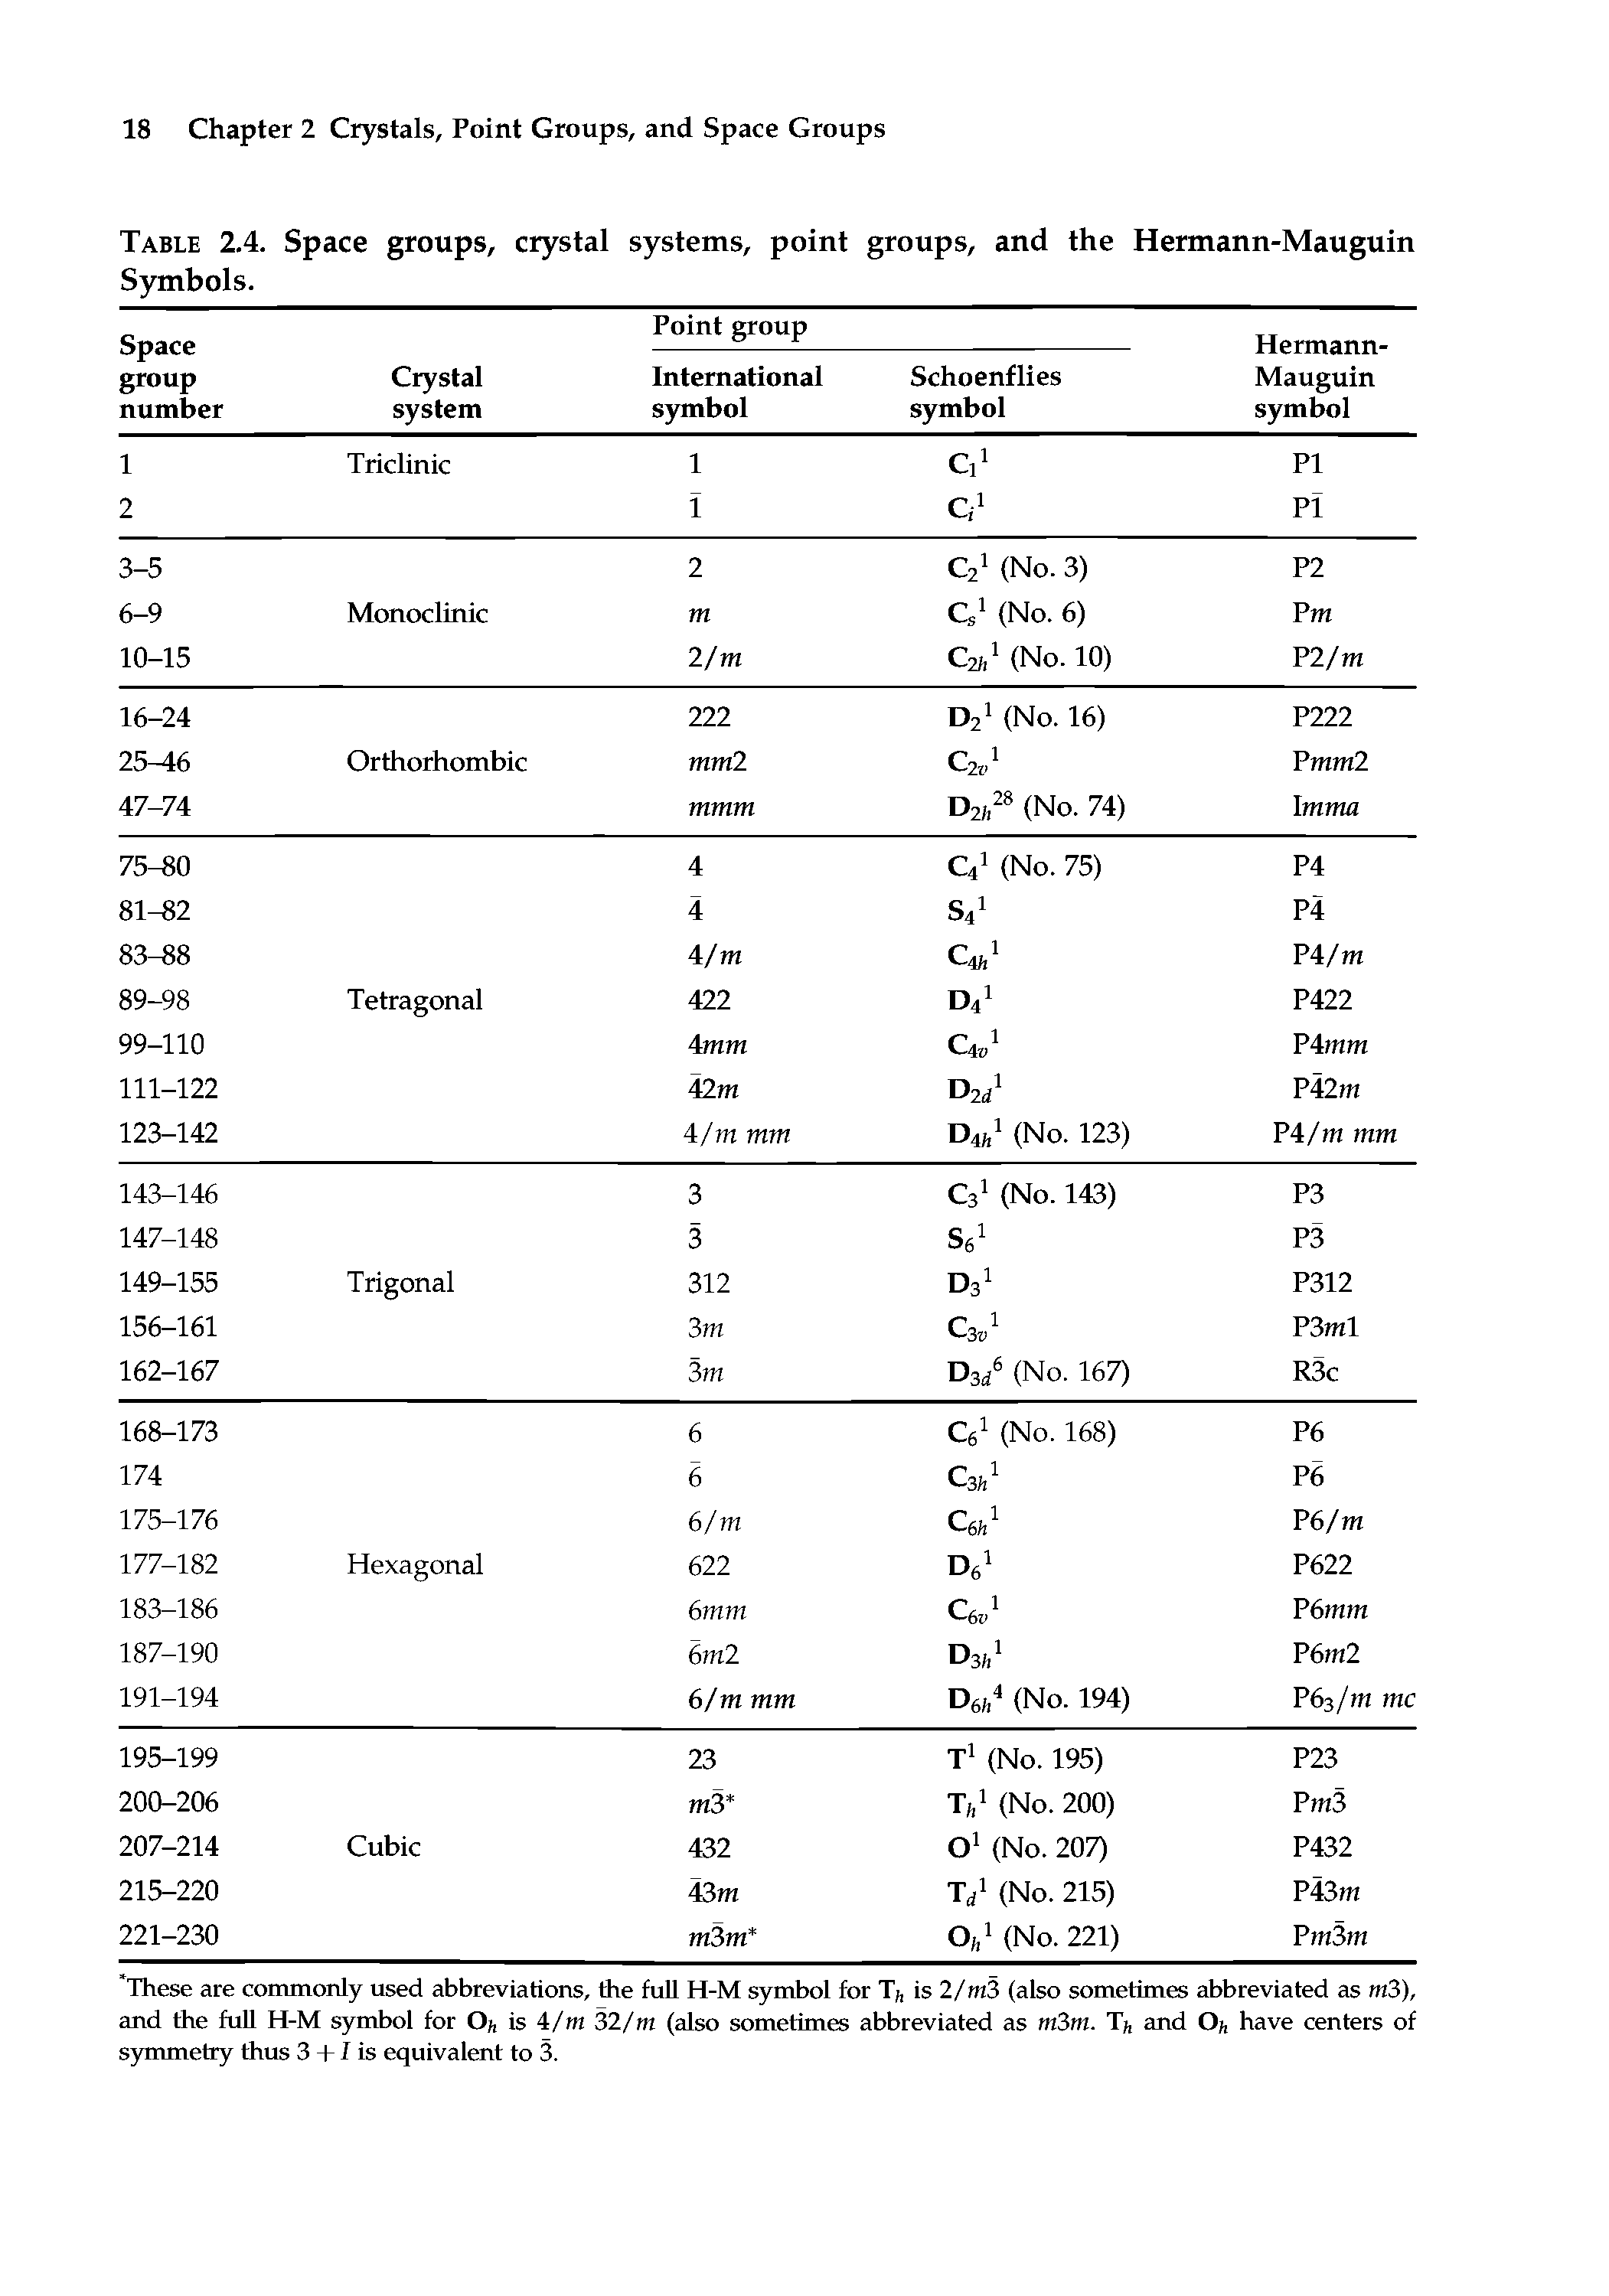 Table 2.4. Space groups, crystal systems, point groups, and the Hermann-Mauguin Symbols.